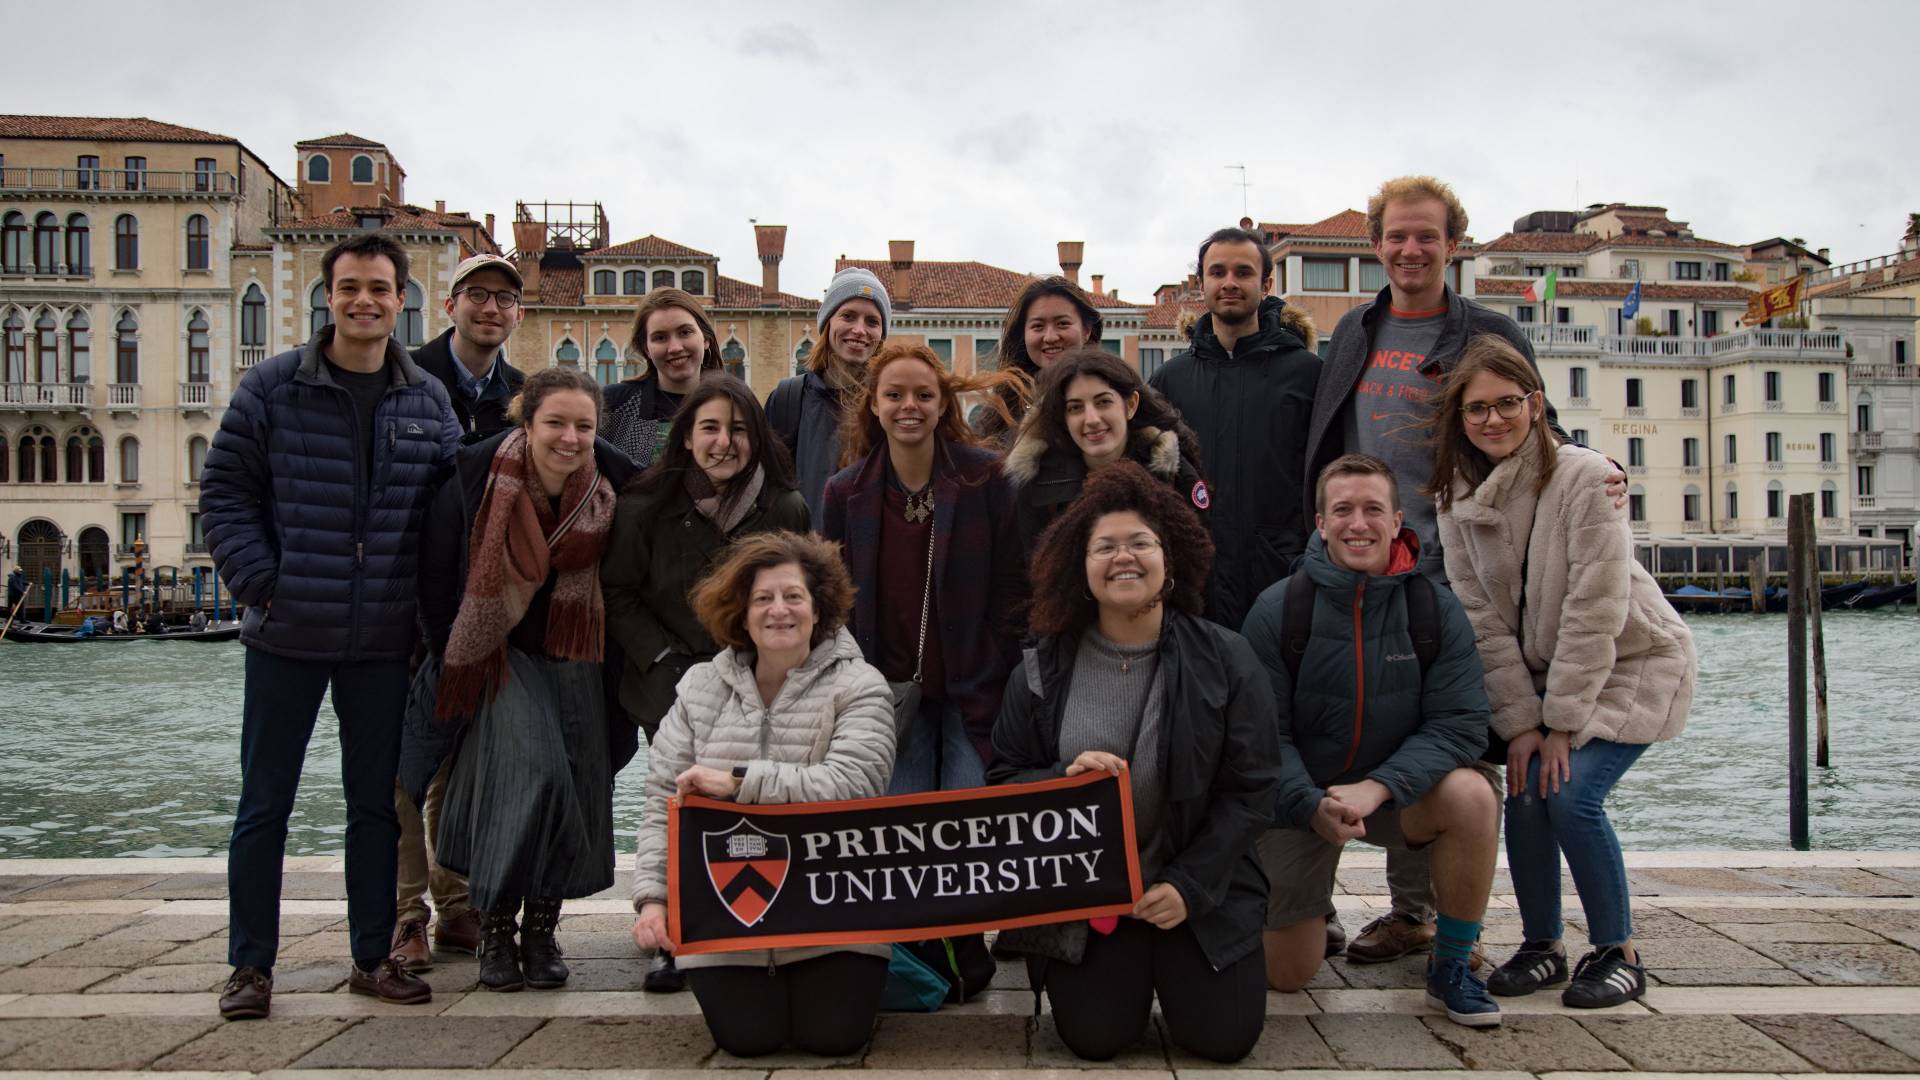 Students and professors in Venice holding Princeton University banner